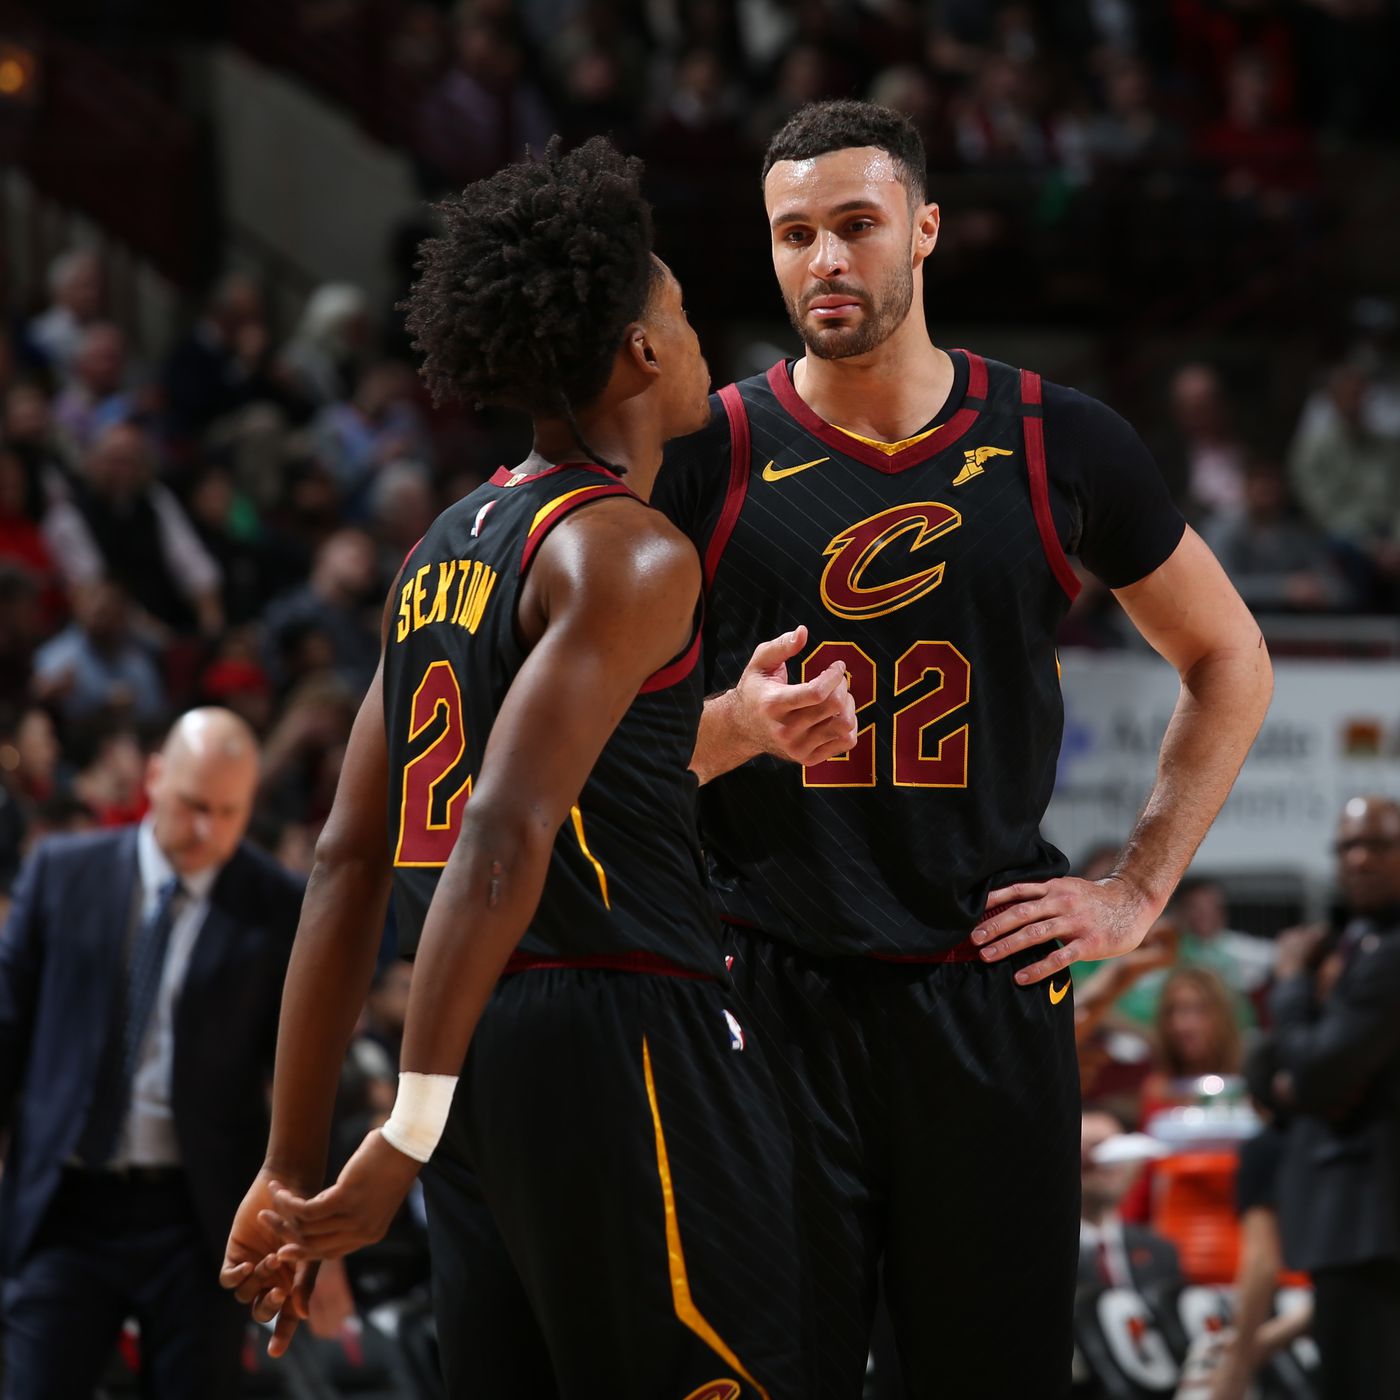 Jersey week: The Cavs need a better black jersey - Fear The Sword